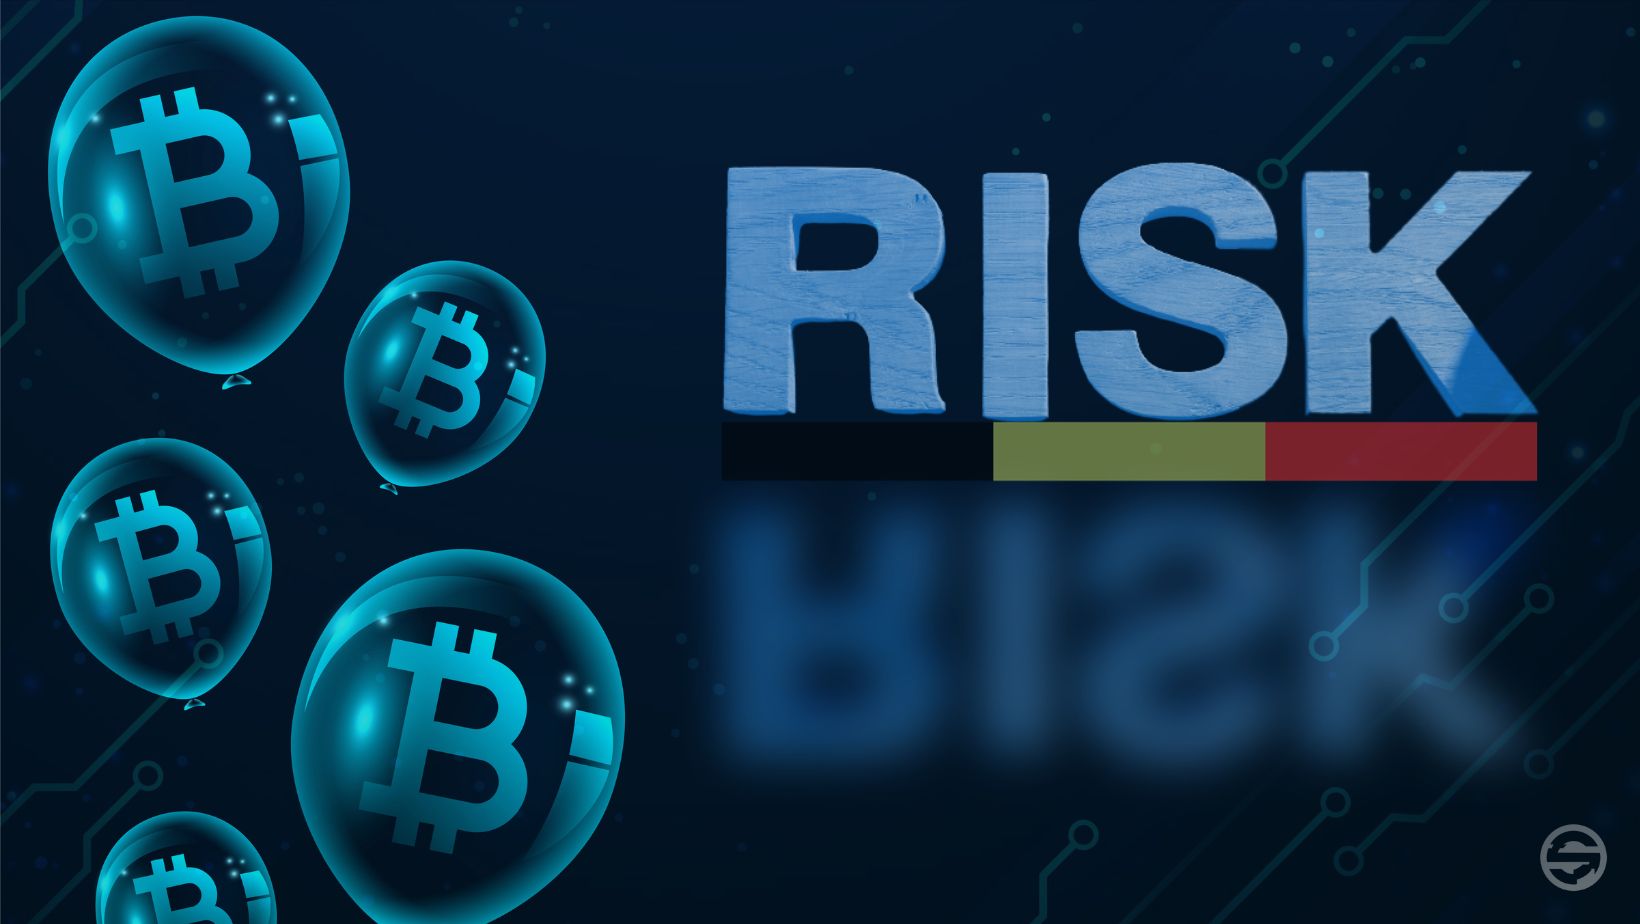 Virtual currency, real risks. In crypto only the risk is guaranteed